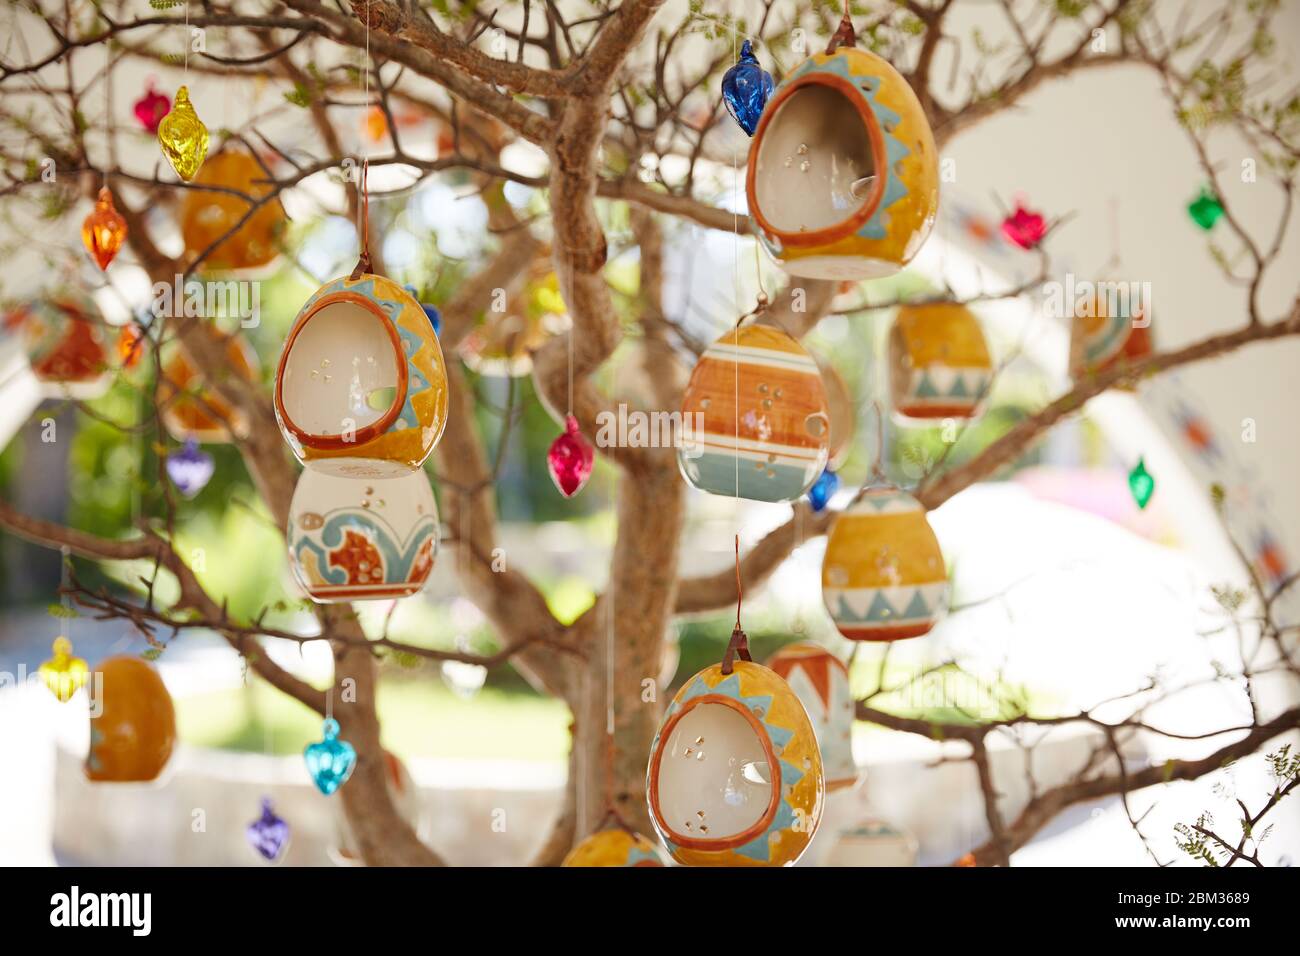 Delicate ceramic ornaments hang from a tree greeting visitors at a luxury resort in Cabo San Lucas, Mexico Stock Photo